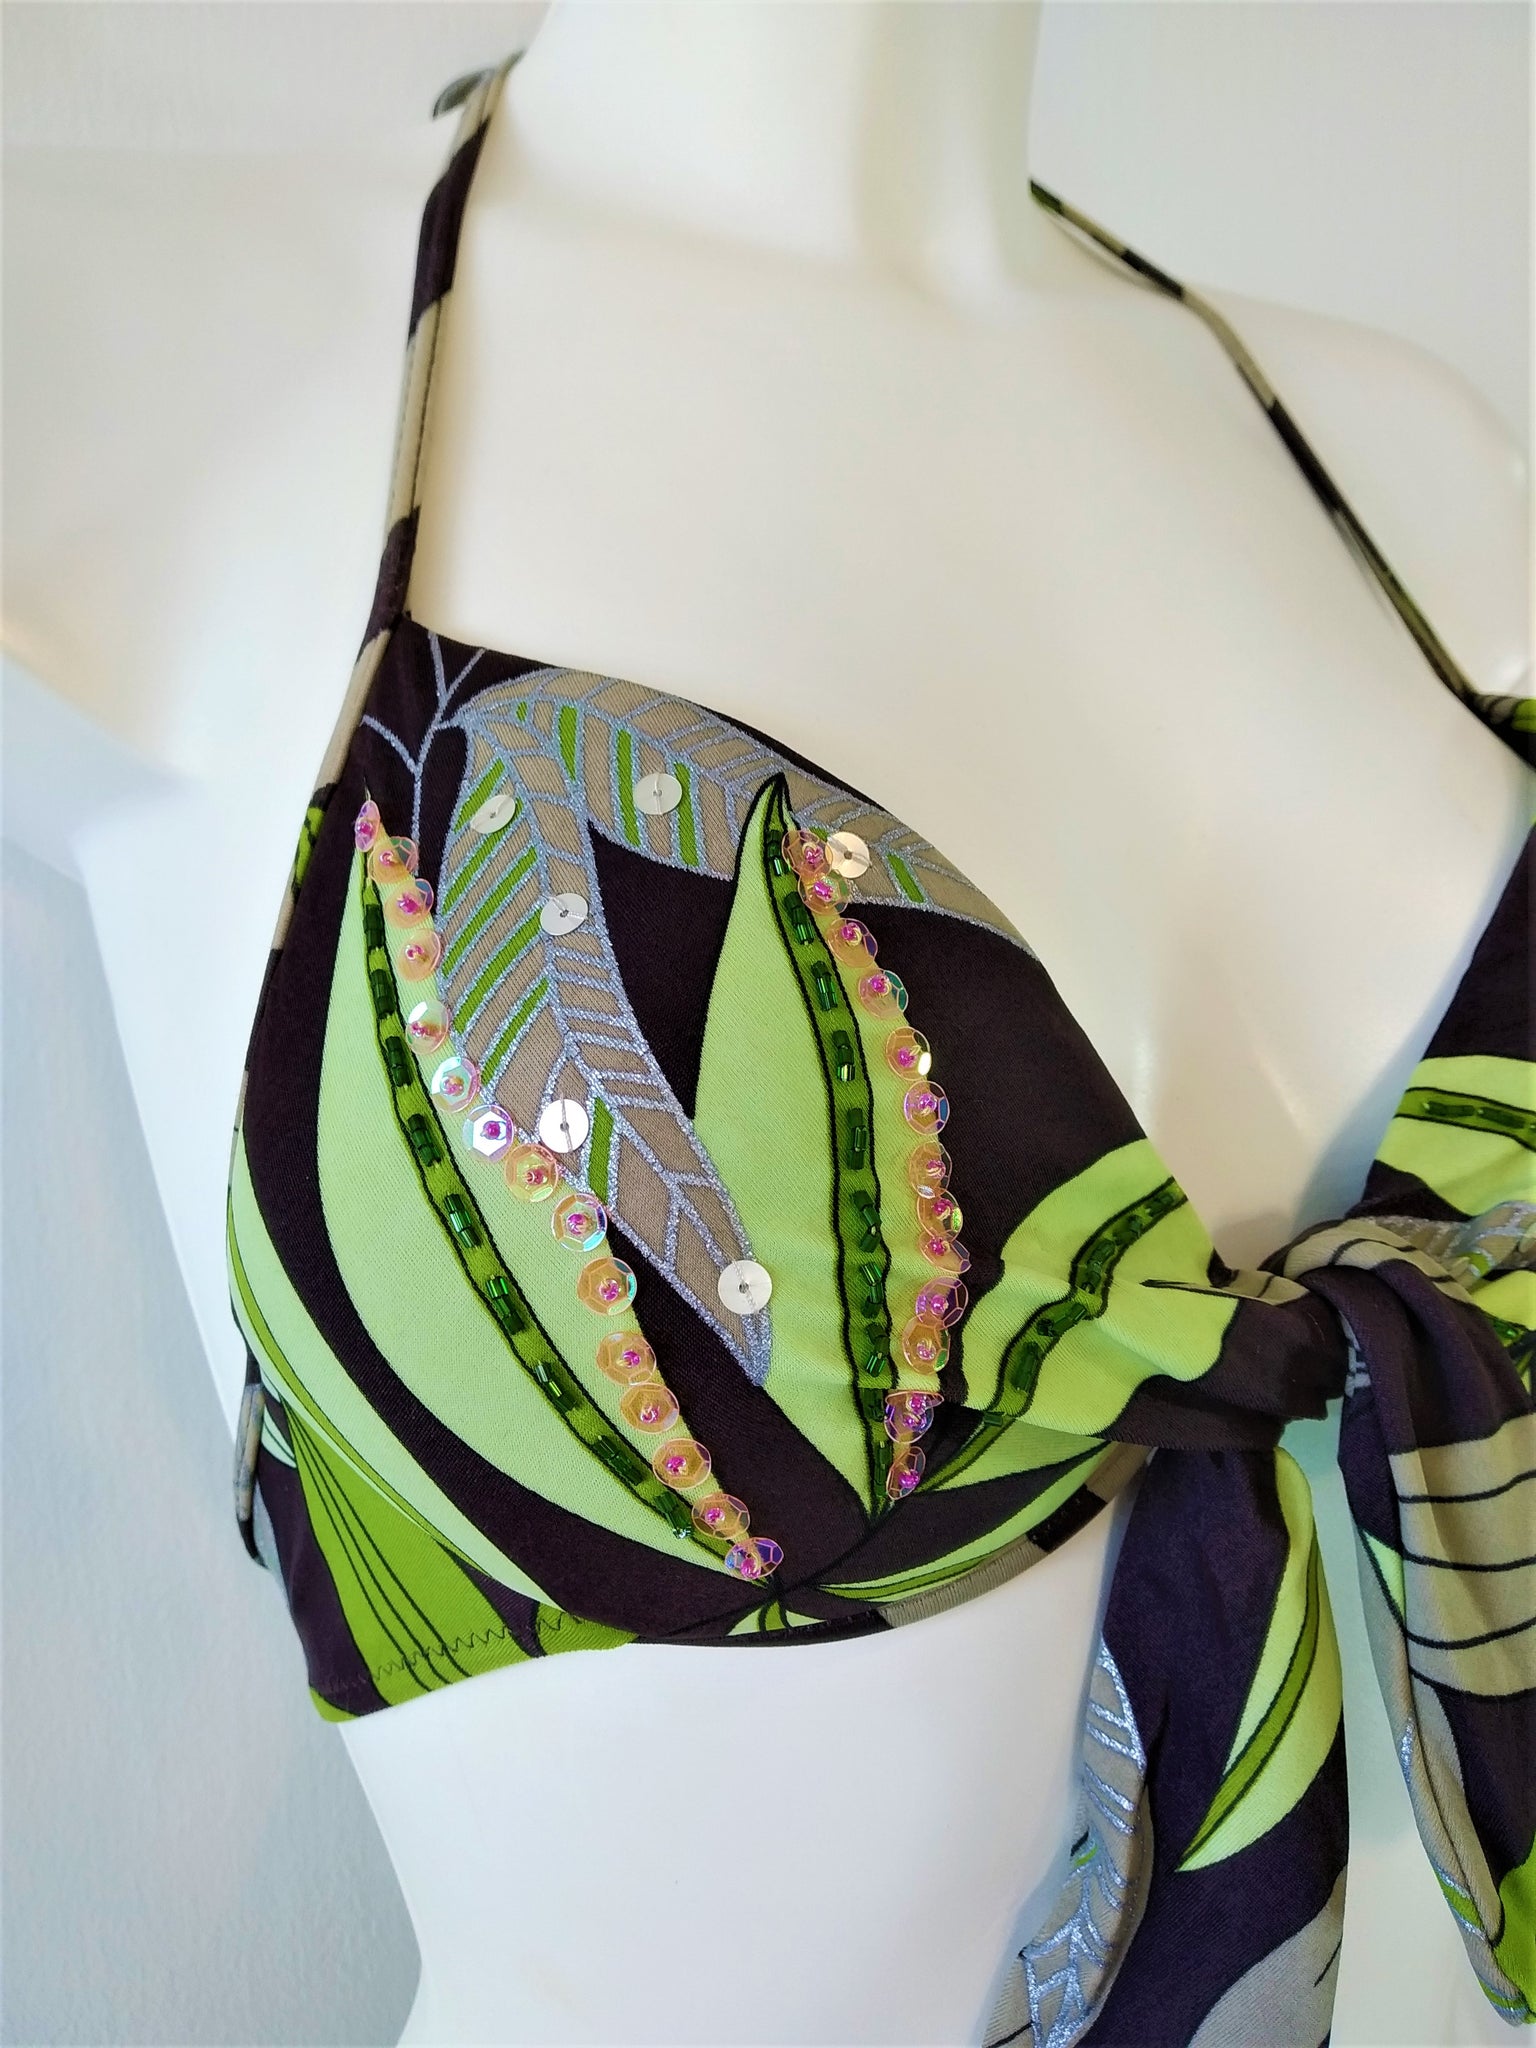 Detail of bikini push-up bra with print of  green leaves on brown background Embellishment: handwork of embroidered beads and sequins. bikinn.com